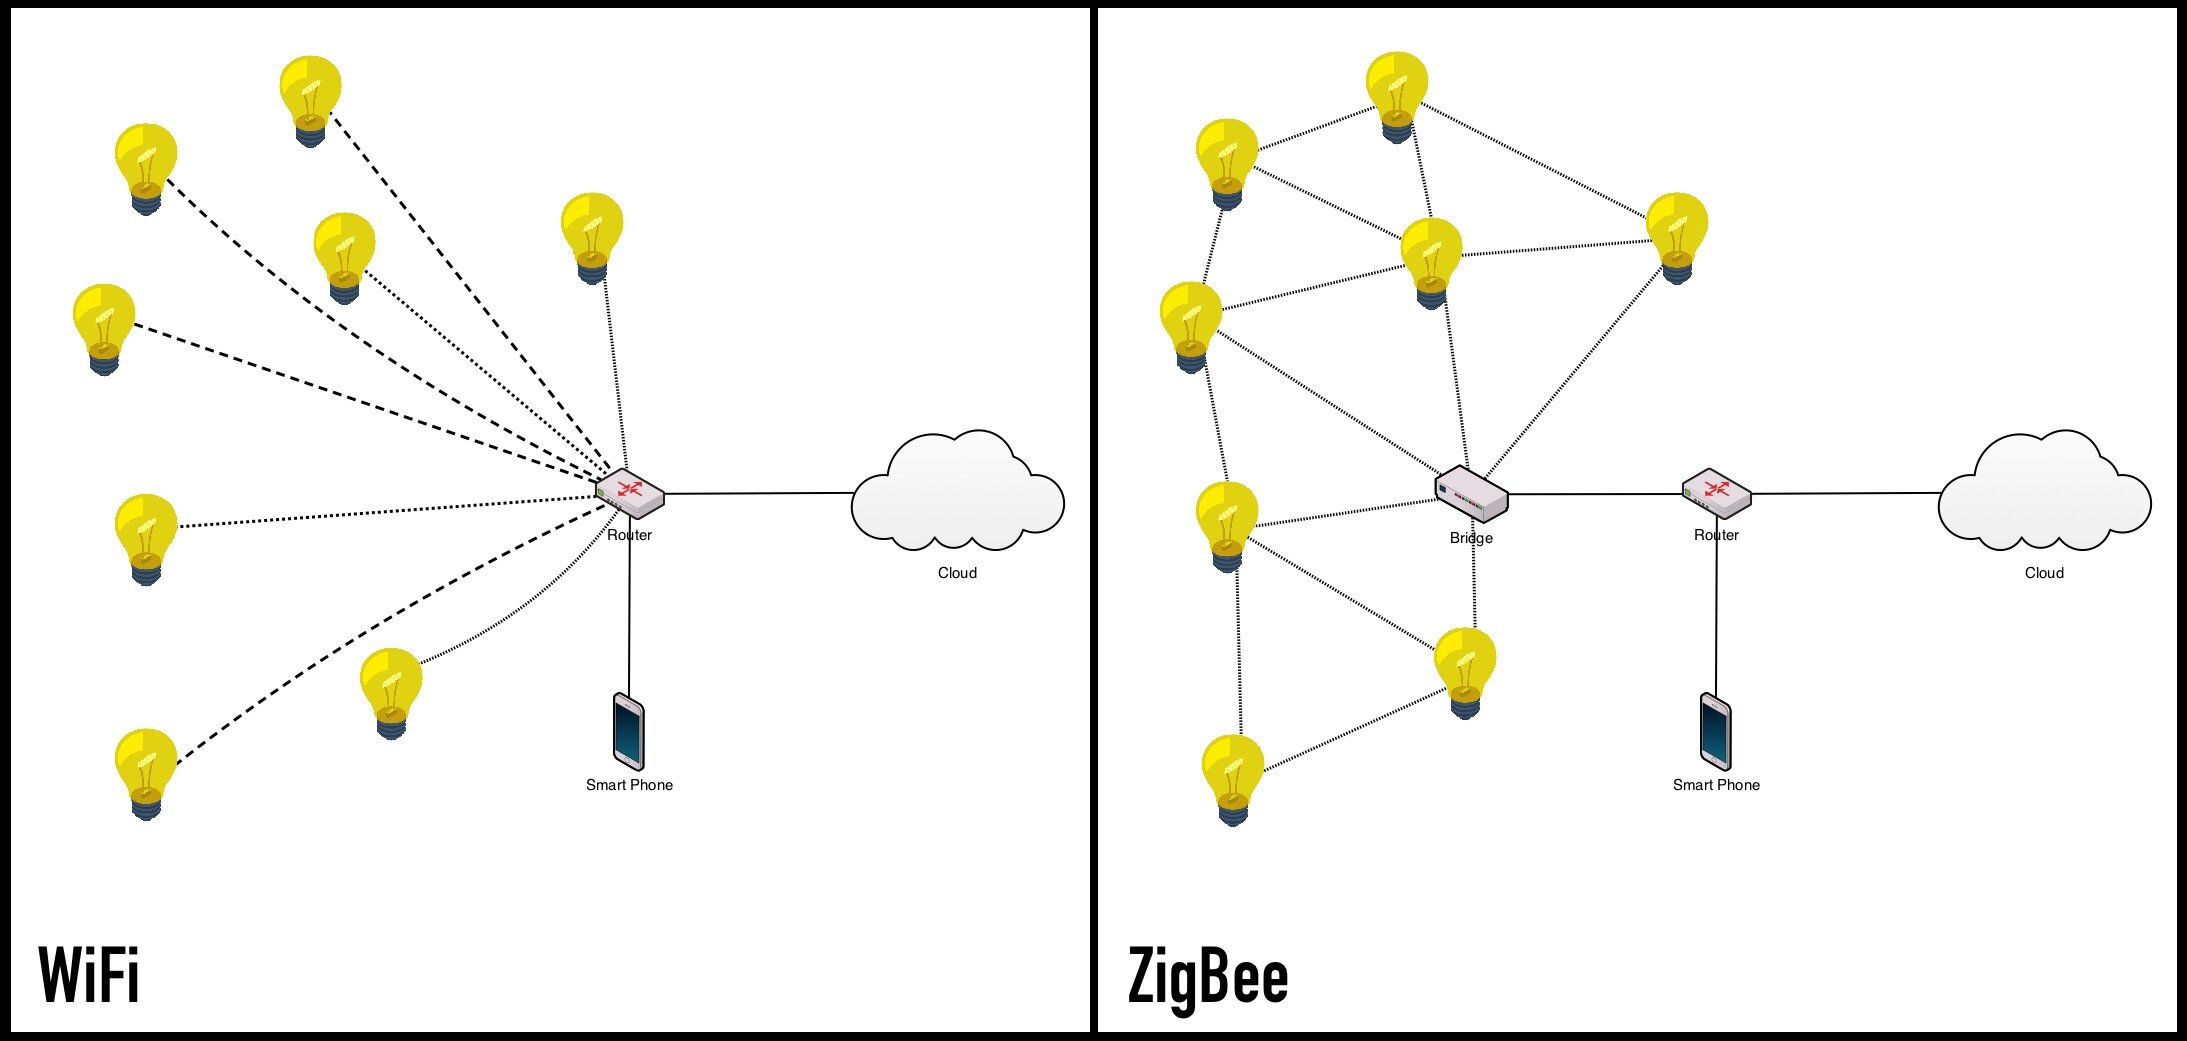 Point-to-Point vs Mesh network